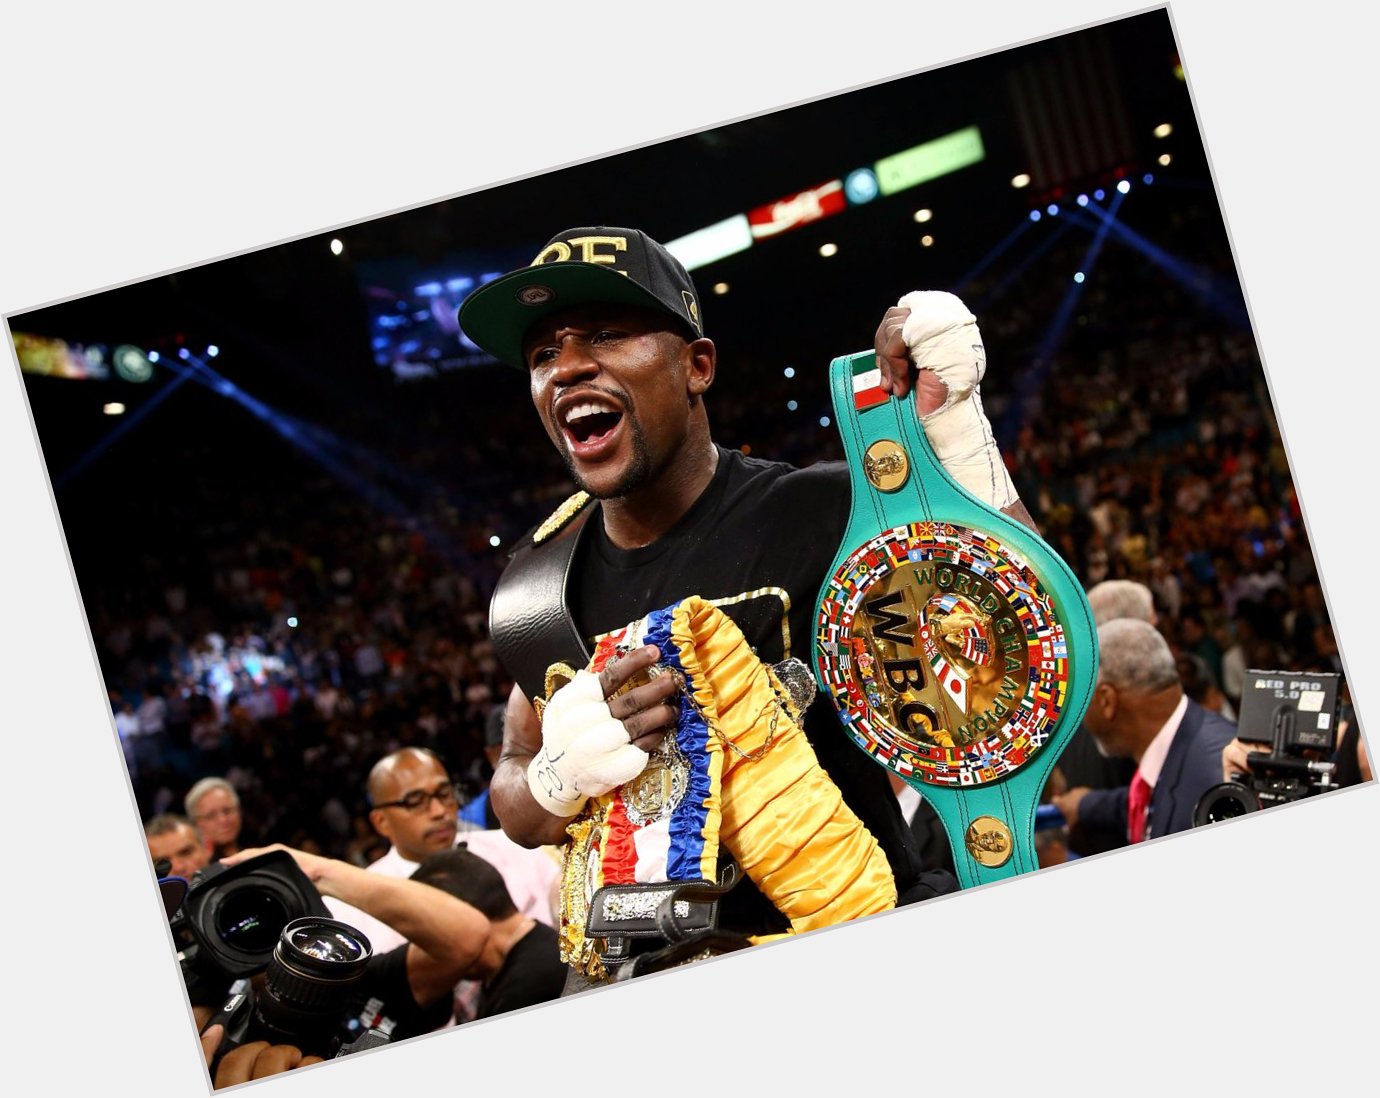 Happy Birthday to Floyd Mayweather Jr., who turns 40 today! 